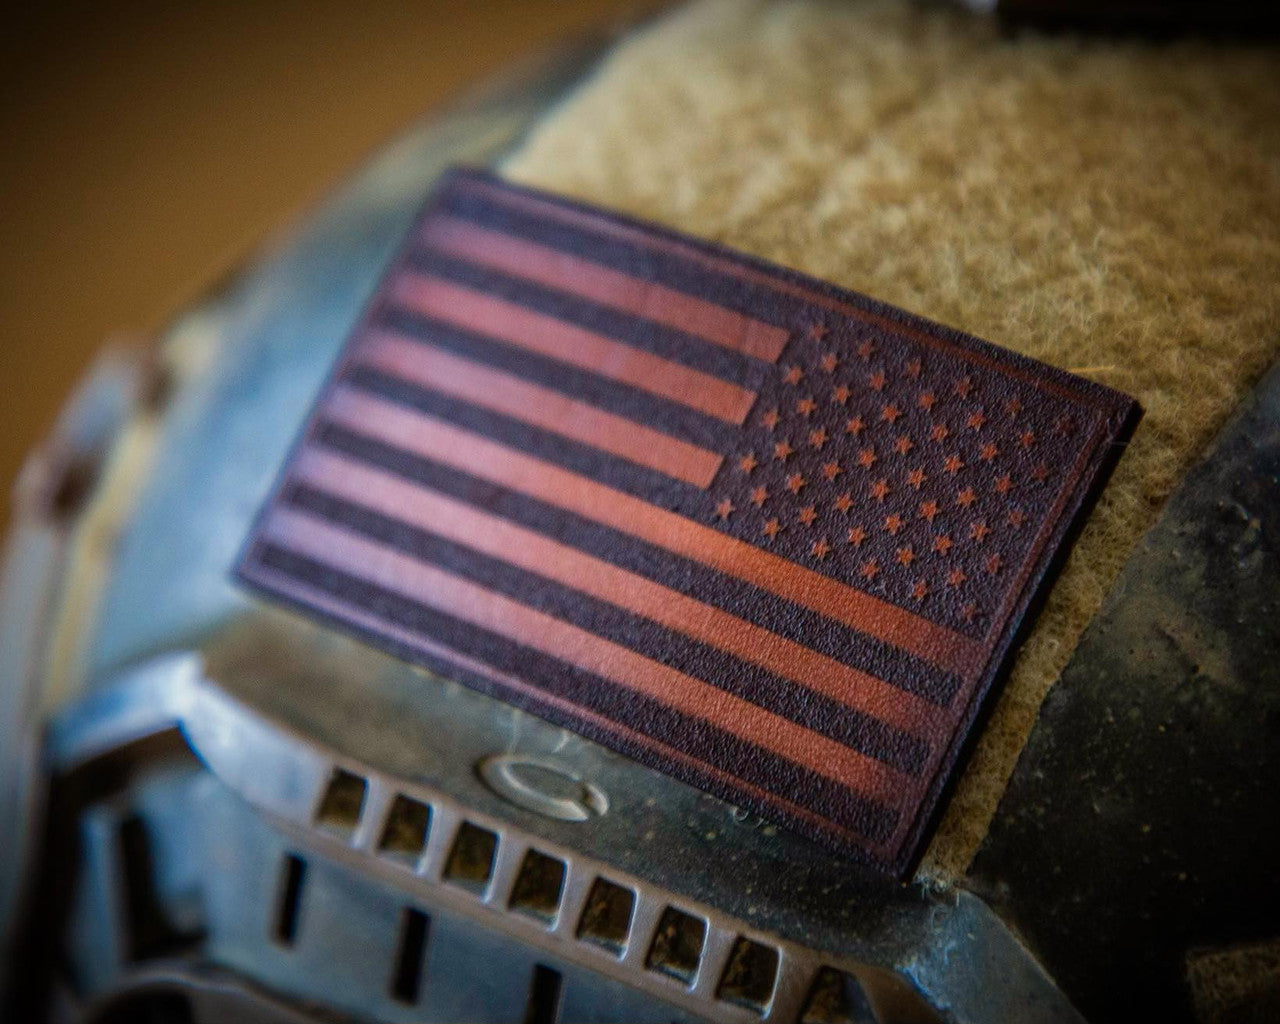 American Made Leather Flag Patch (Right Facing)